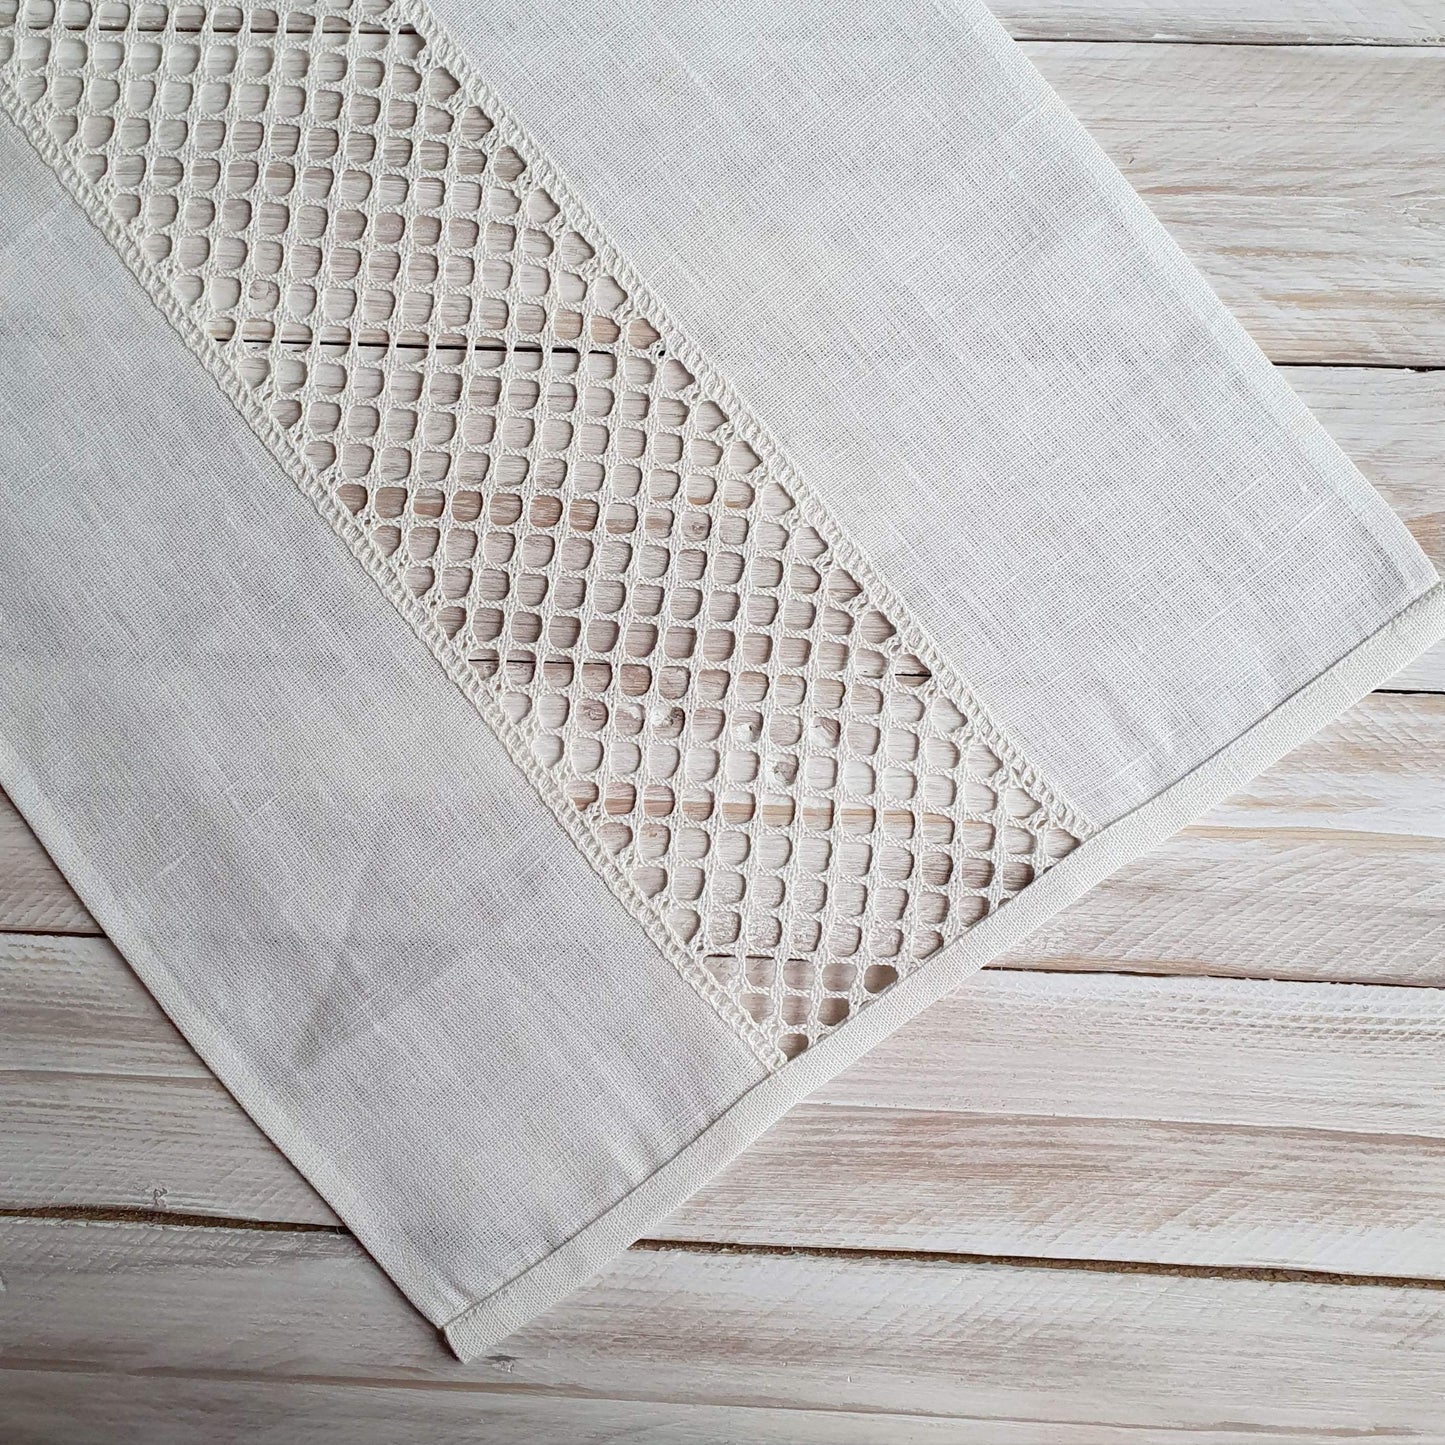 Table runner with lace EMMA - Linen4me